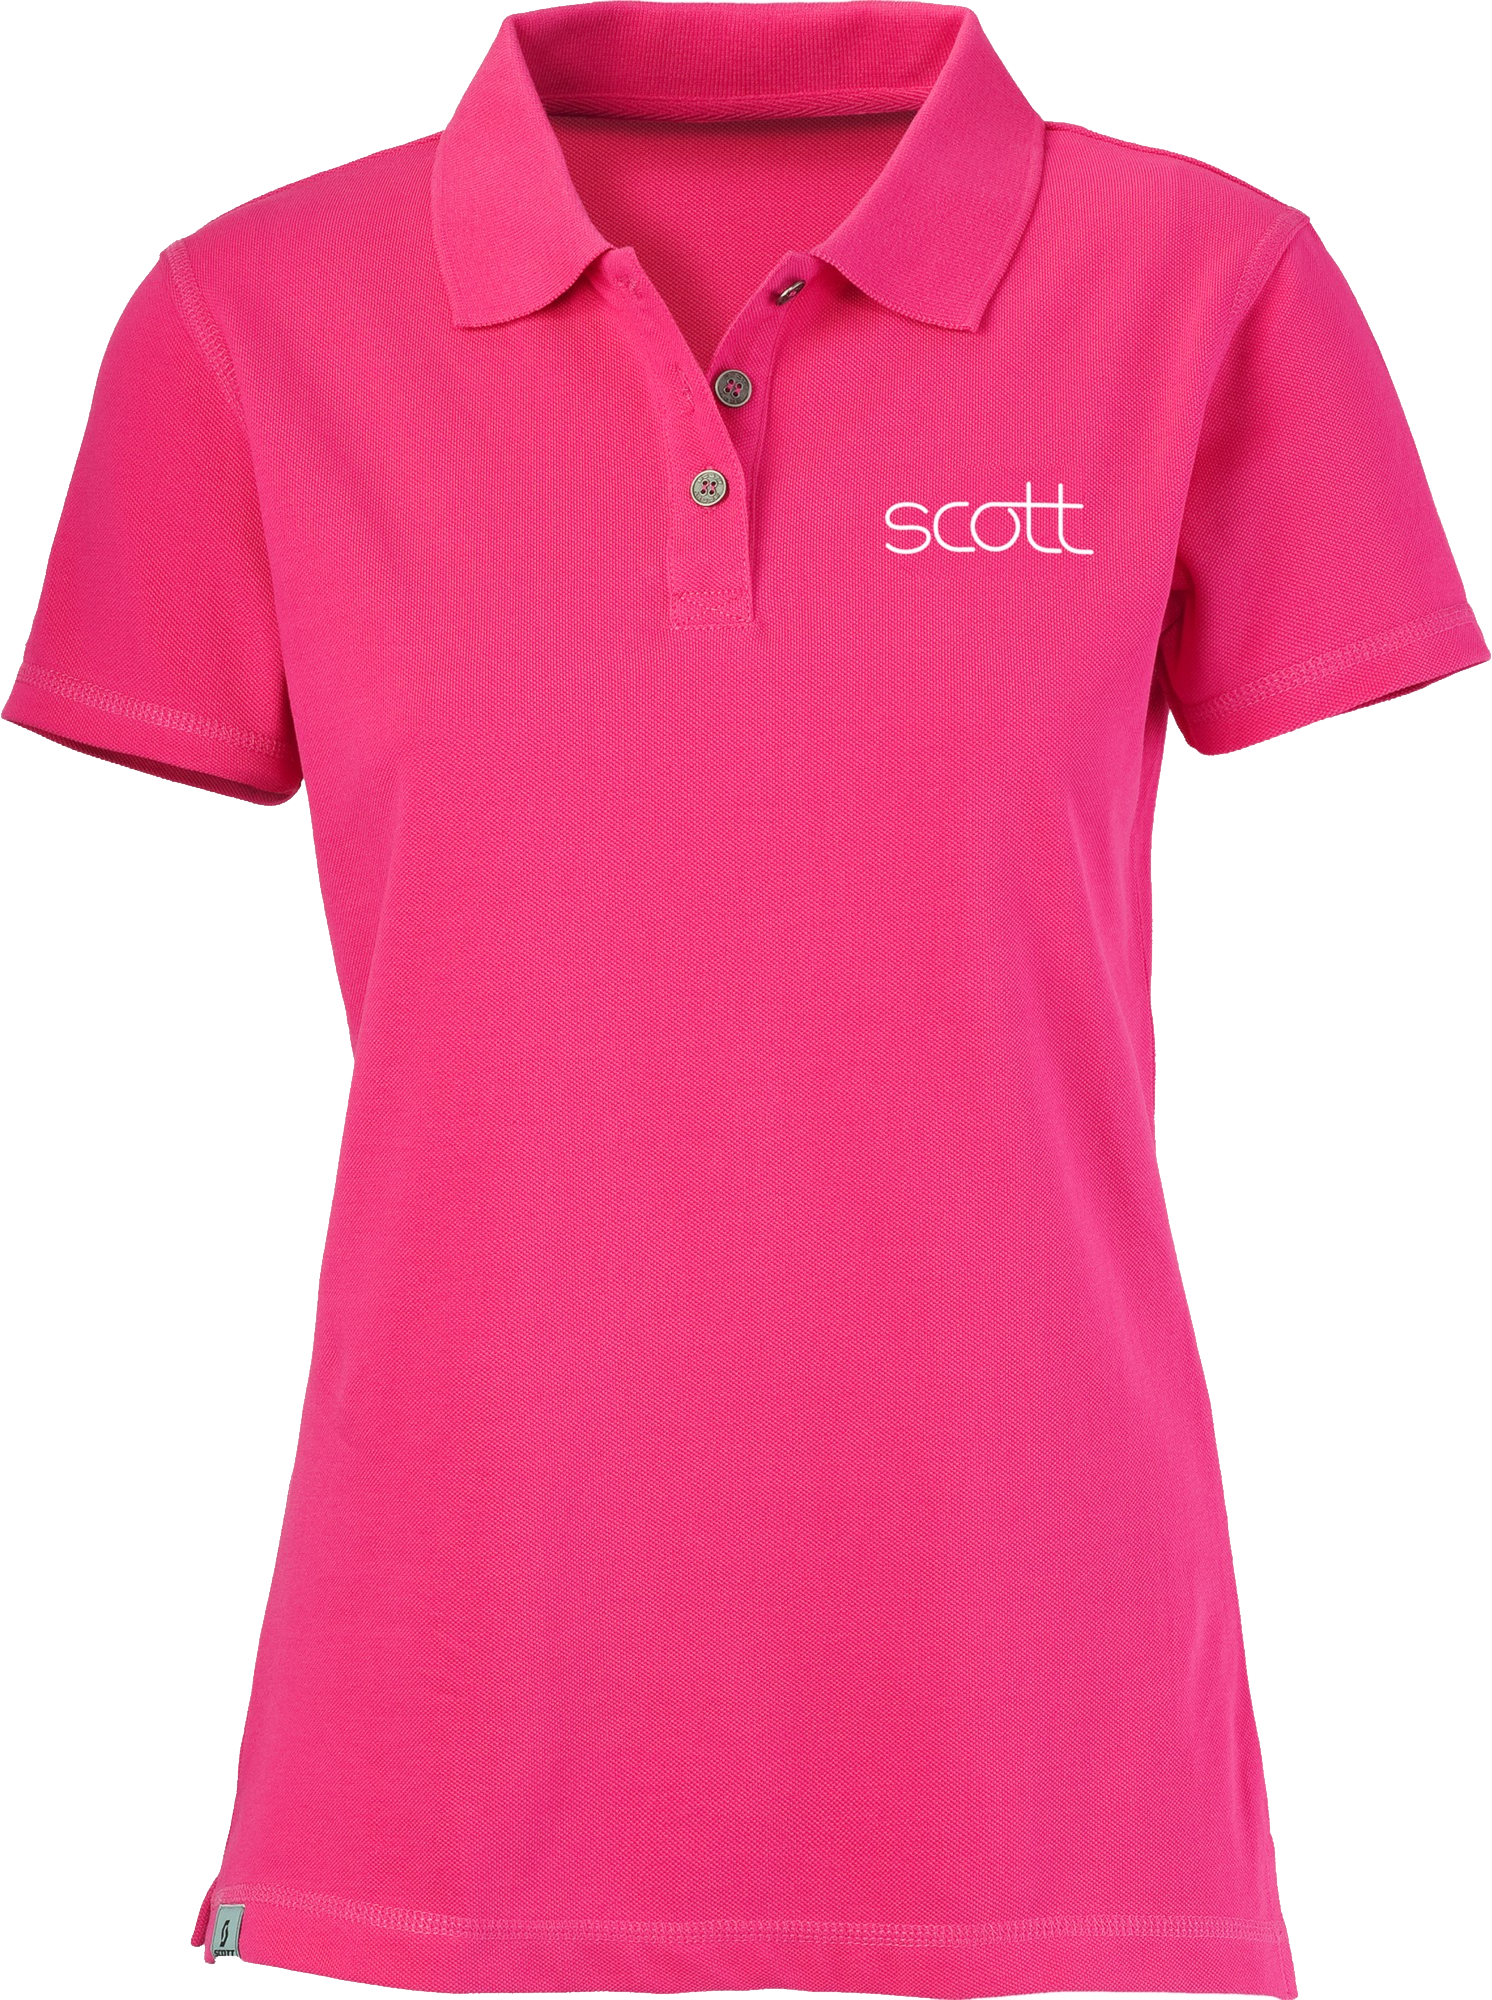 Polo Shirt PNG Picture